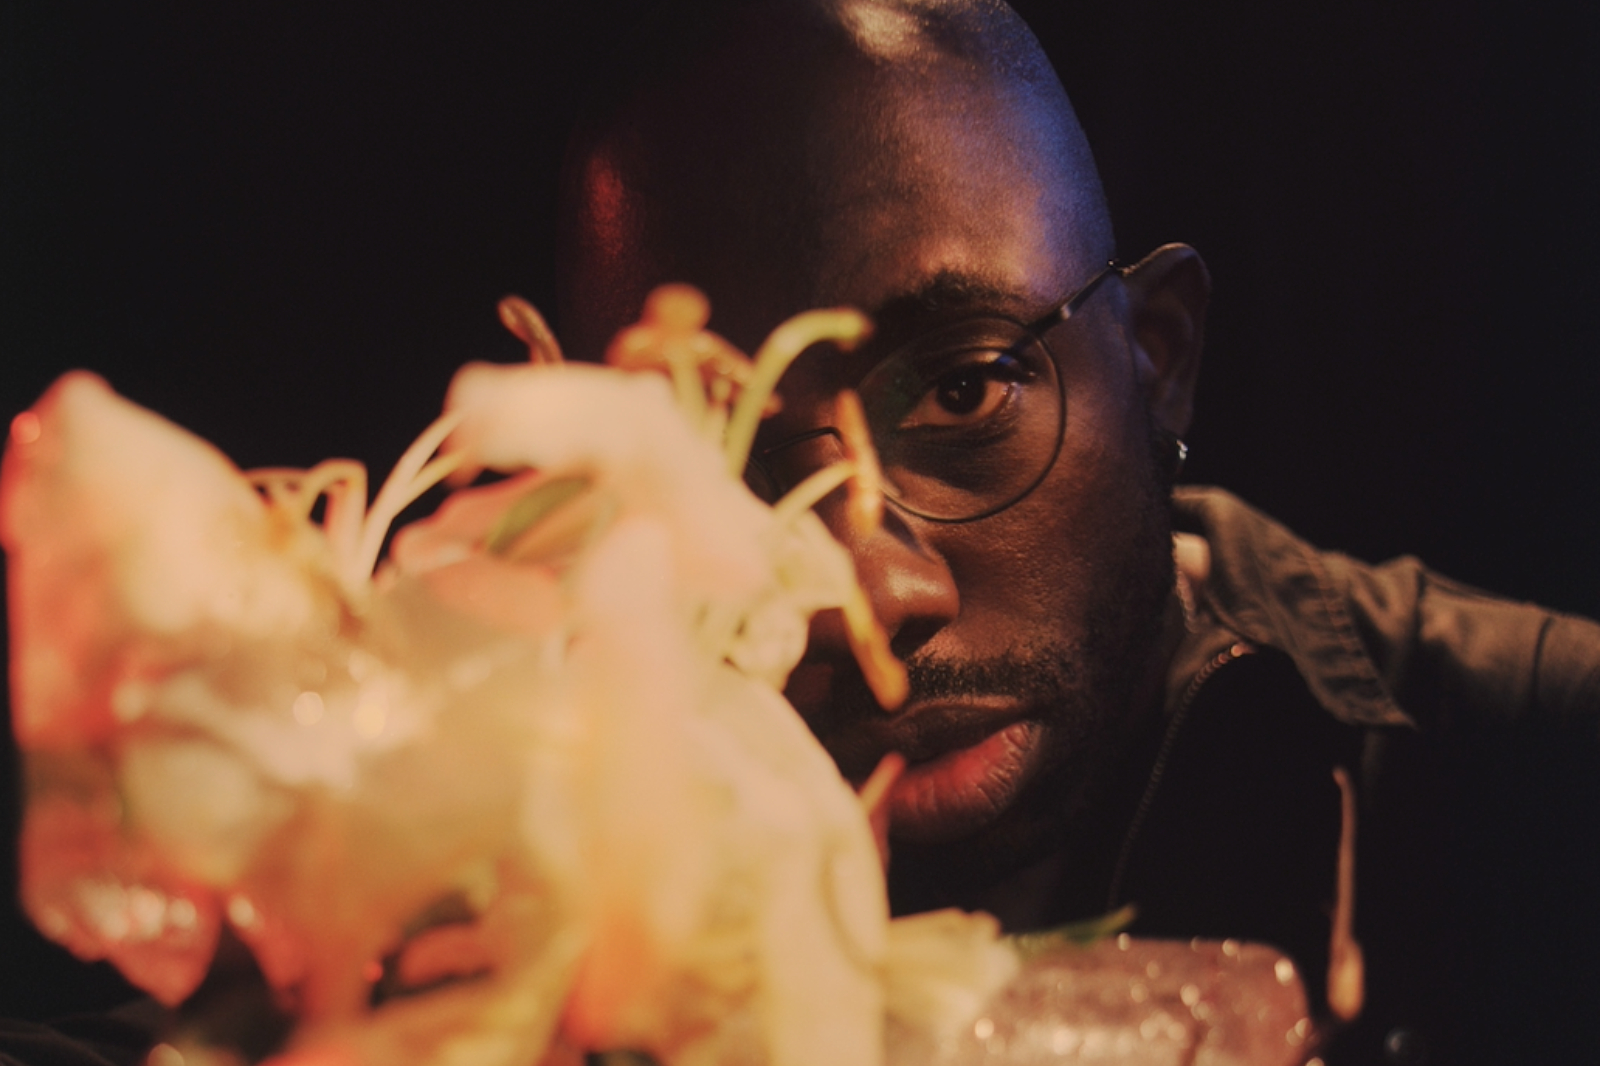 Ghostpoet shares new single 'Nowhere To Hide Now'